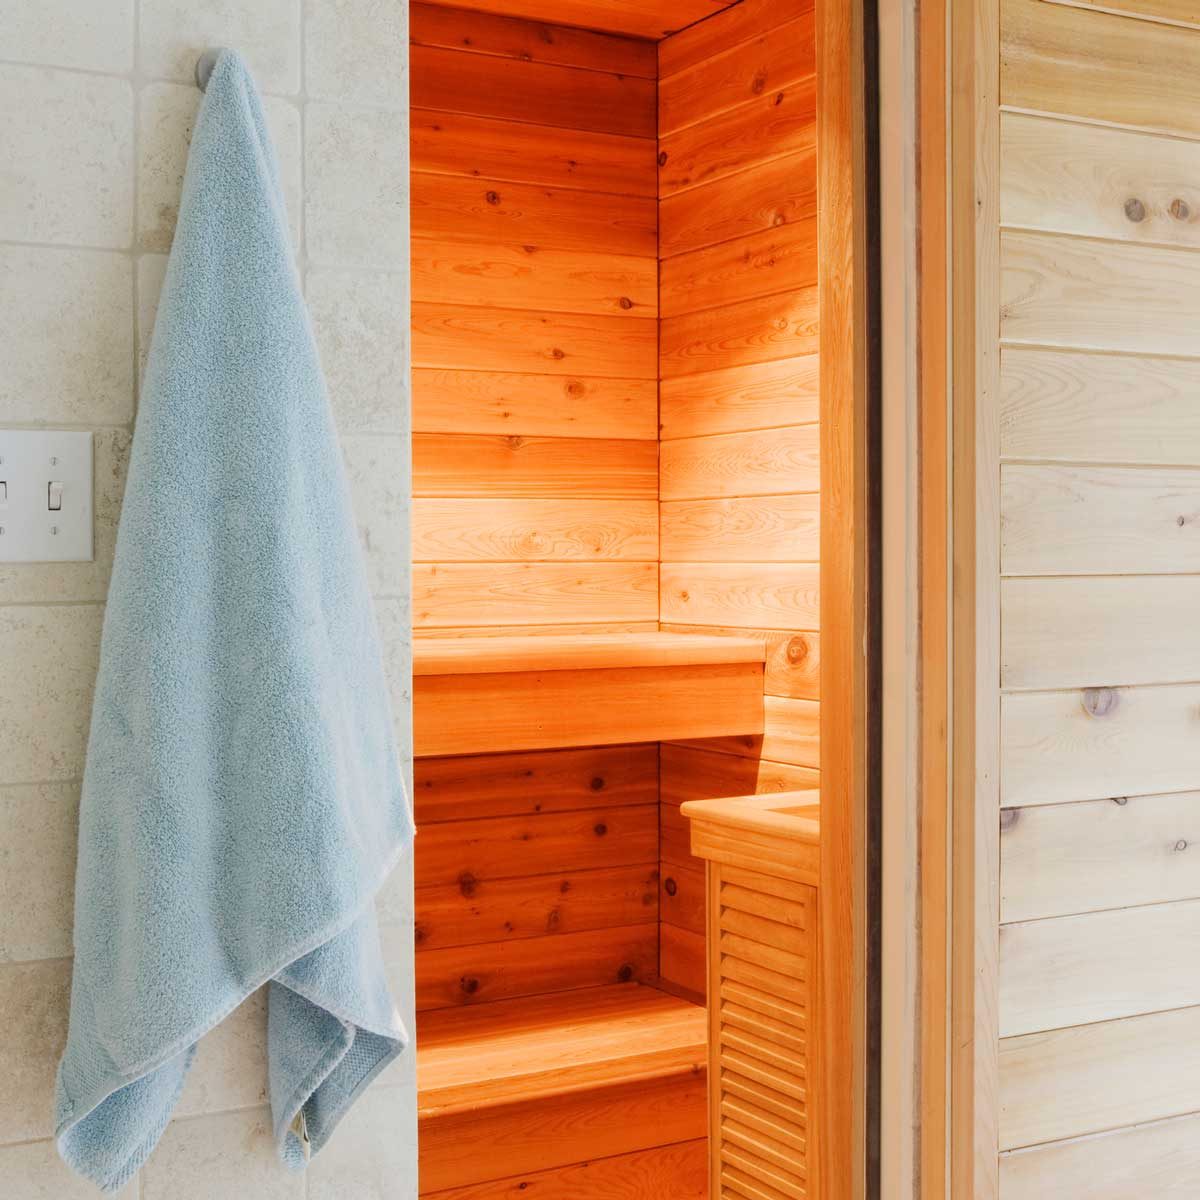 What to Know About Home Saunas